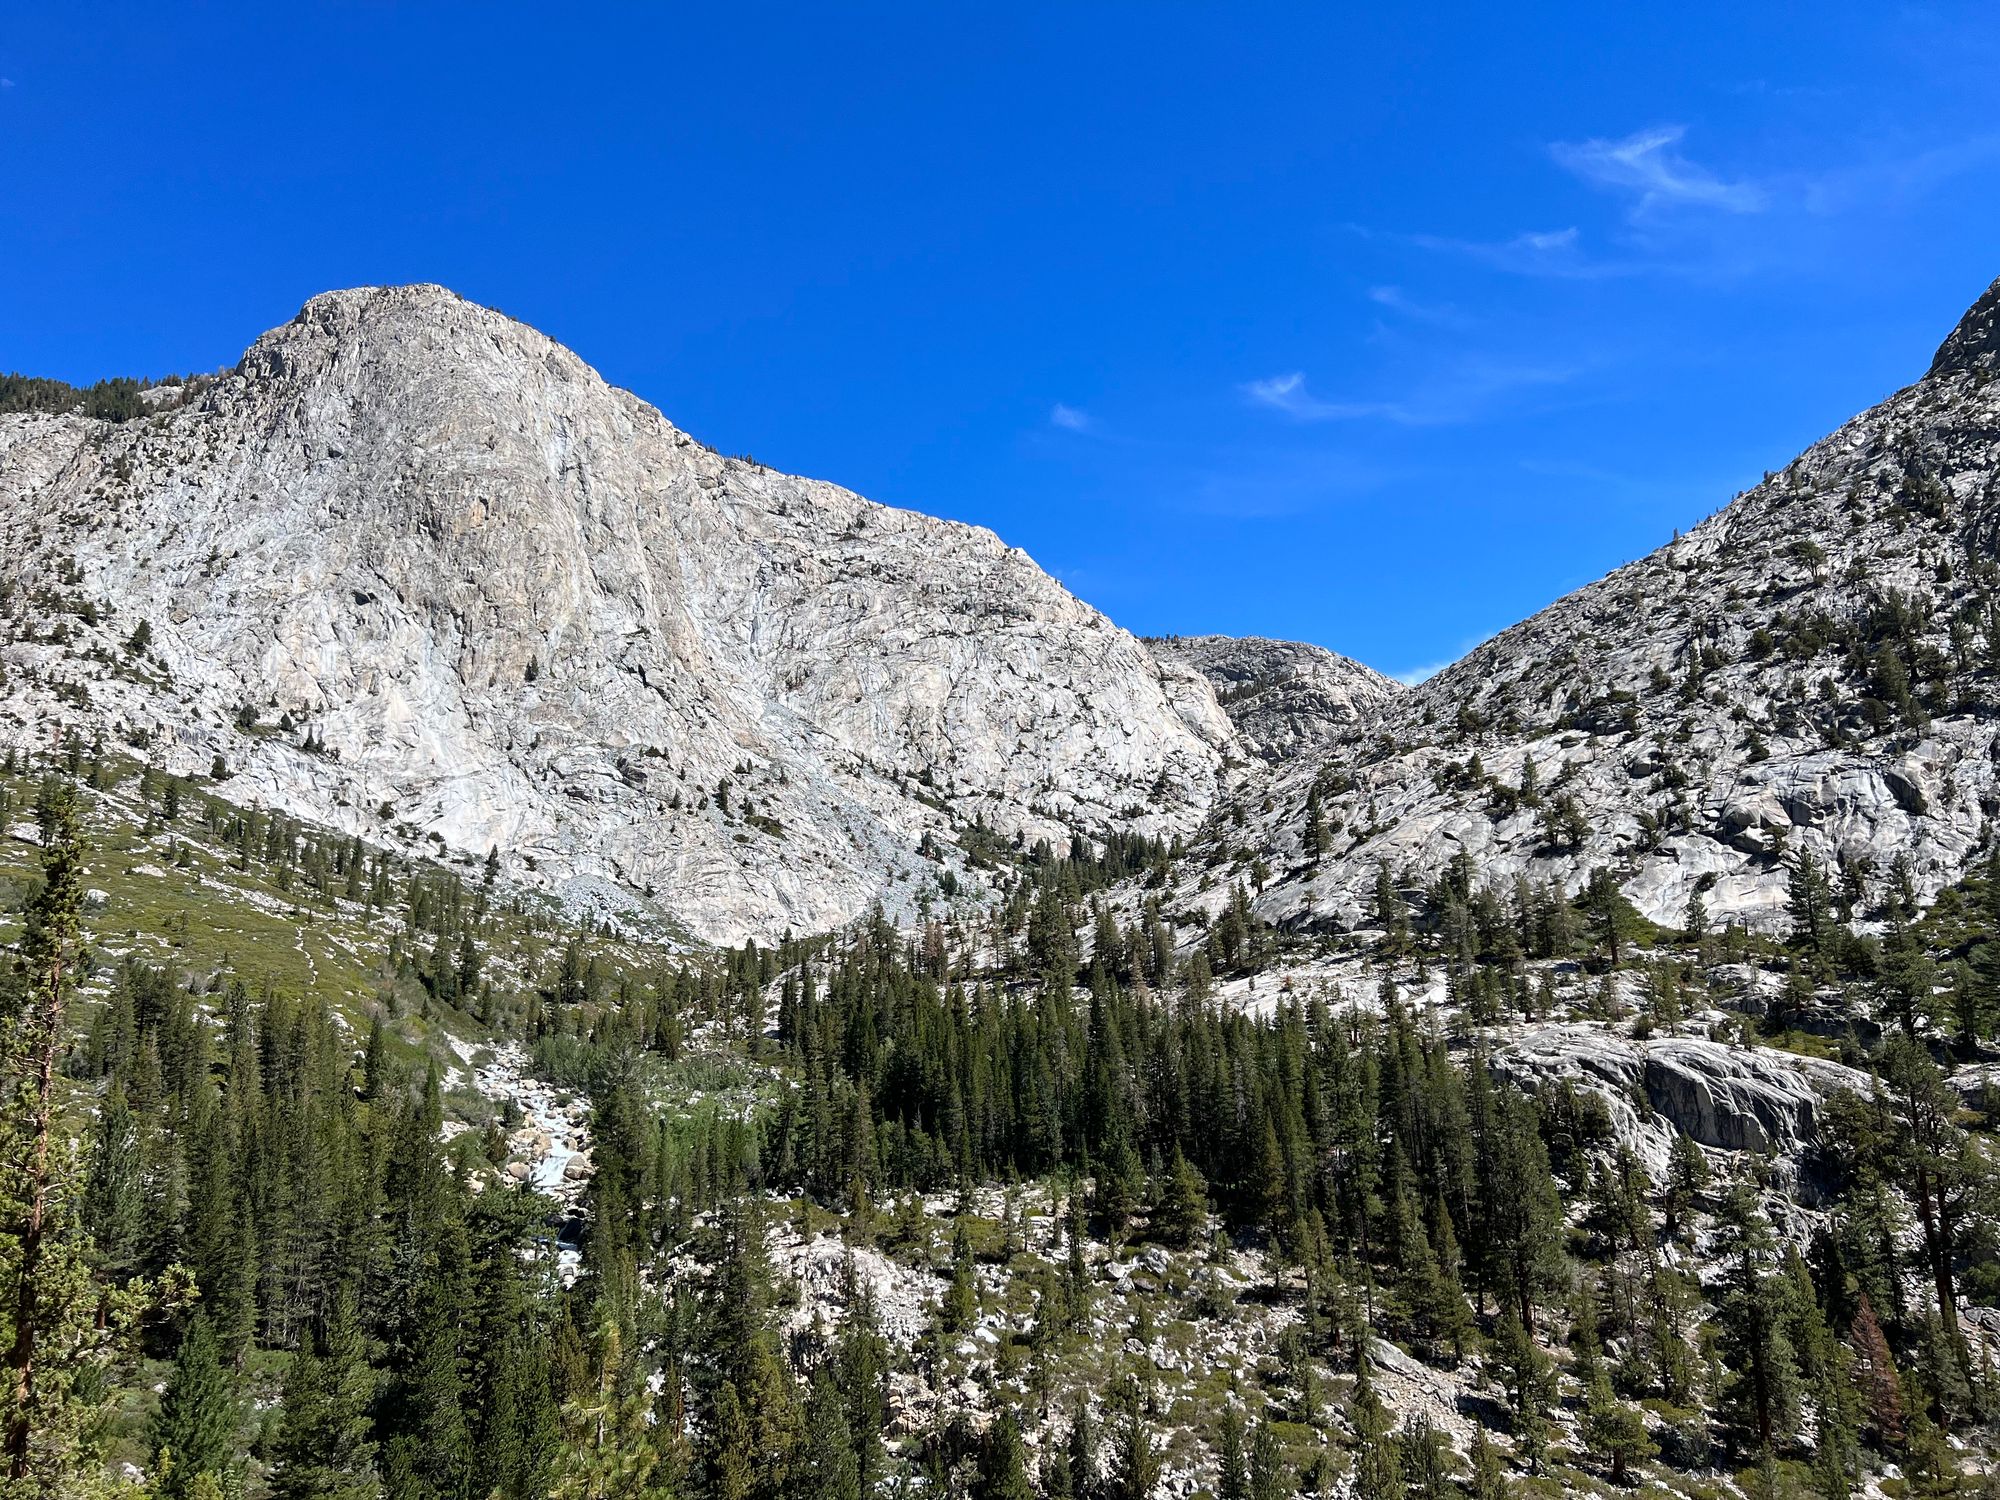 A mountain valley with bare granite mountains, conifers in the valley. 